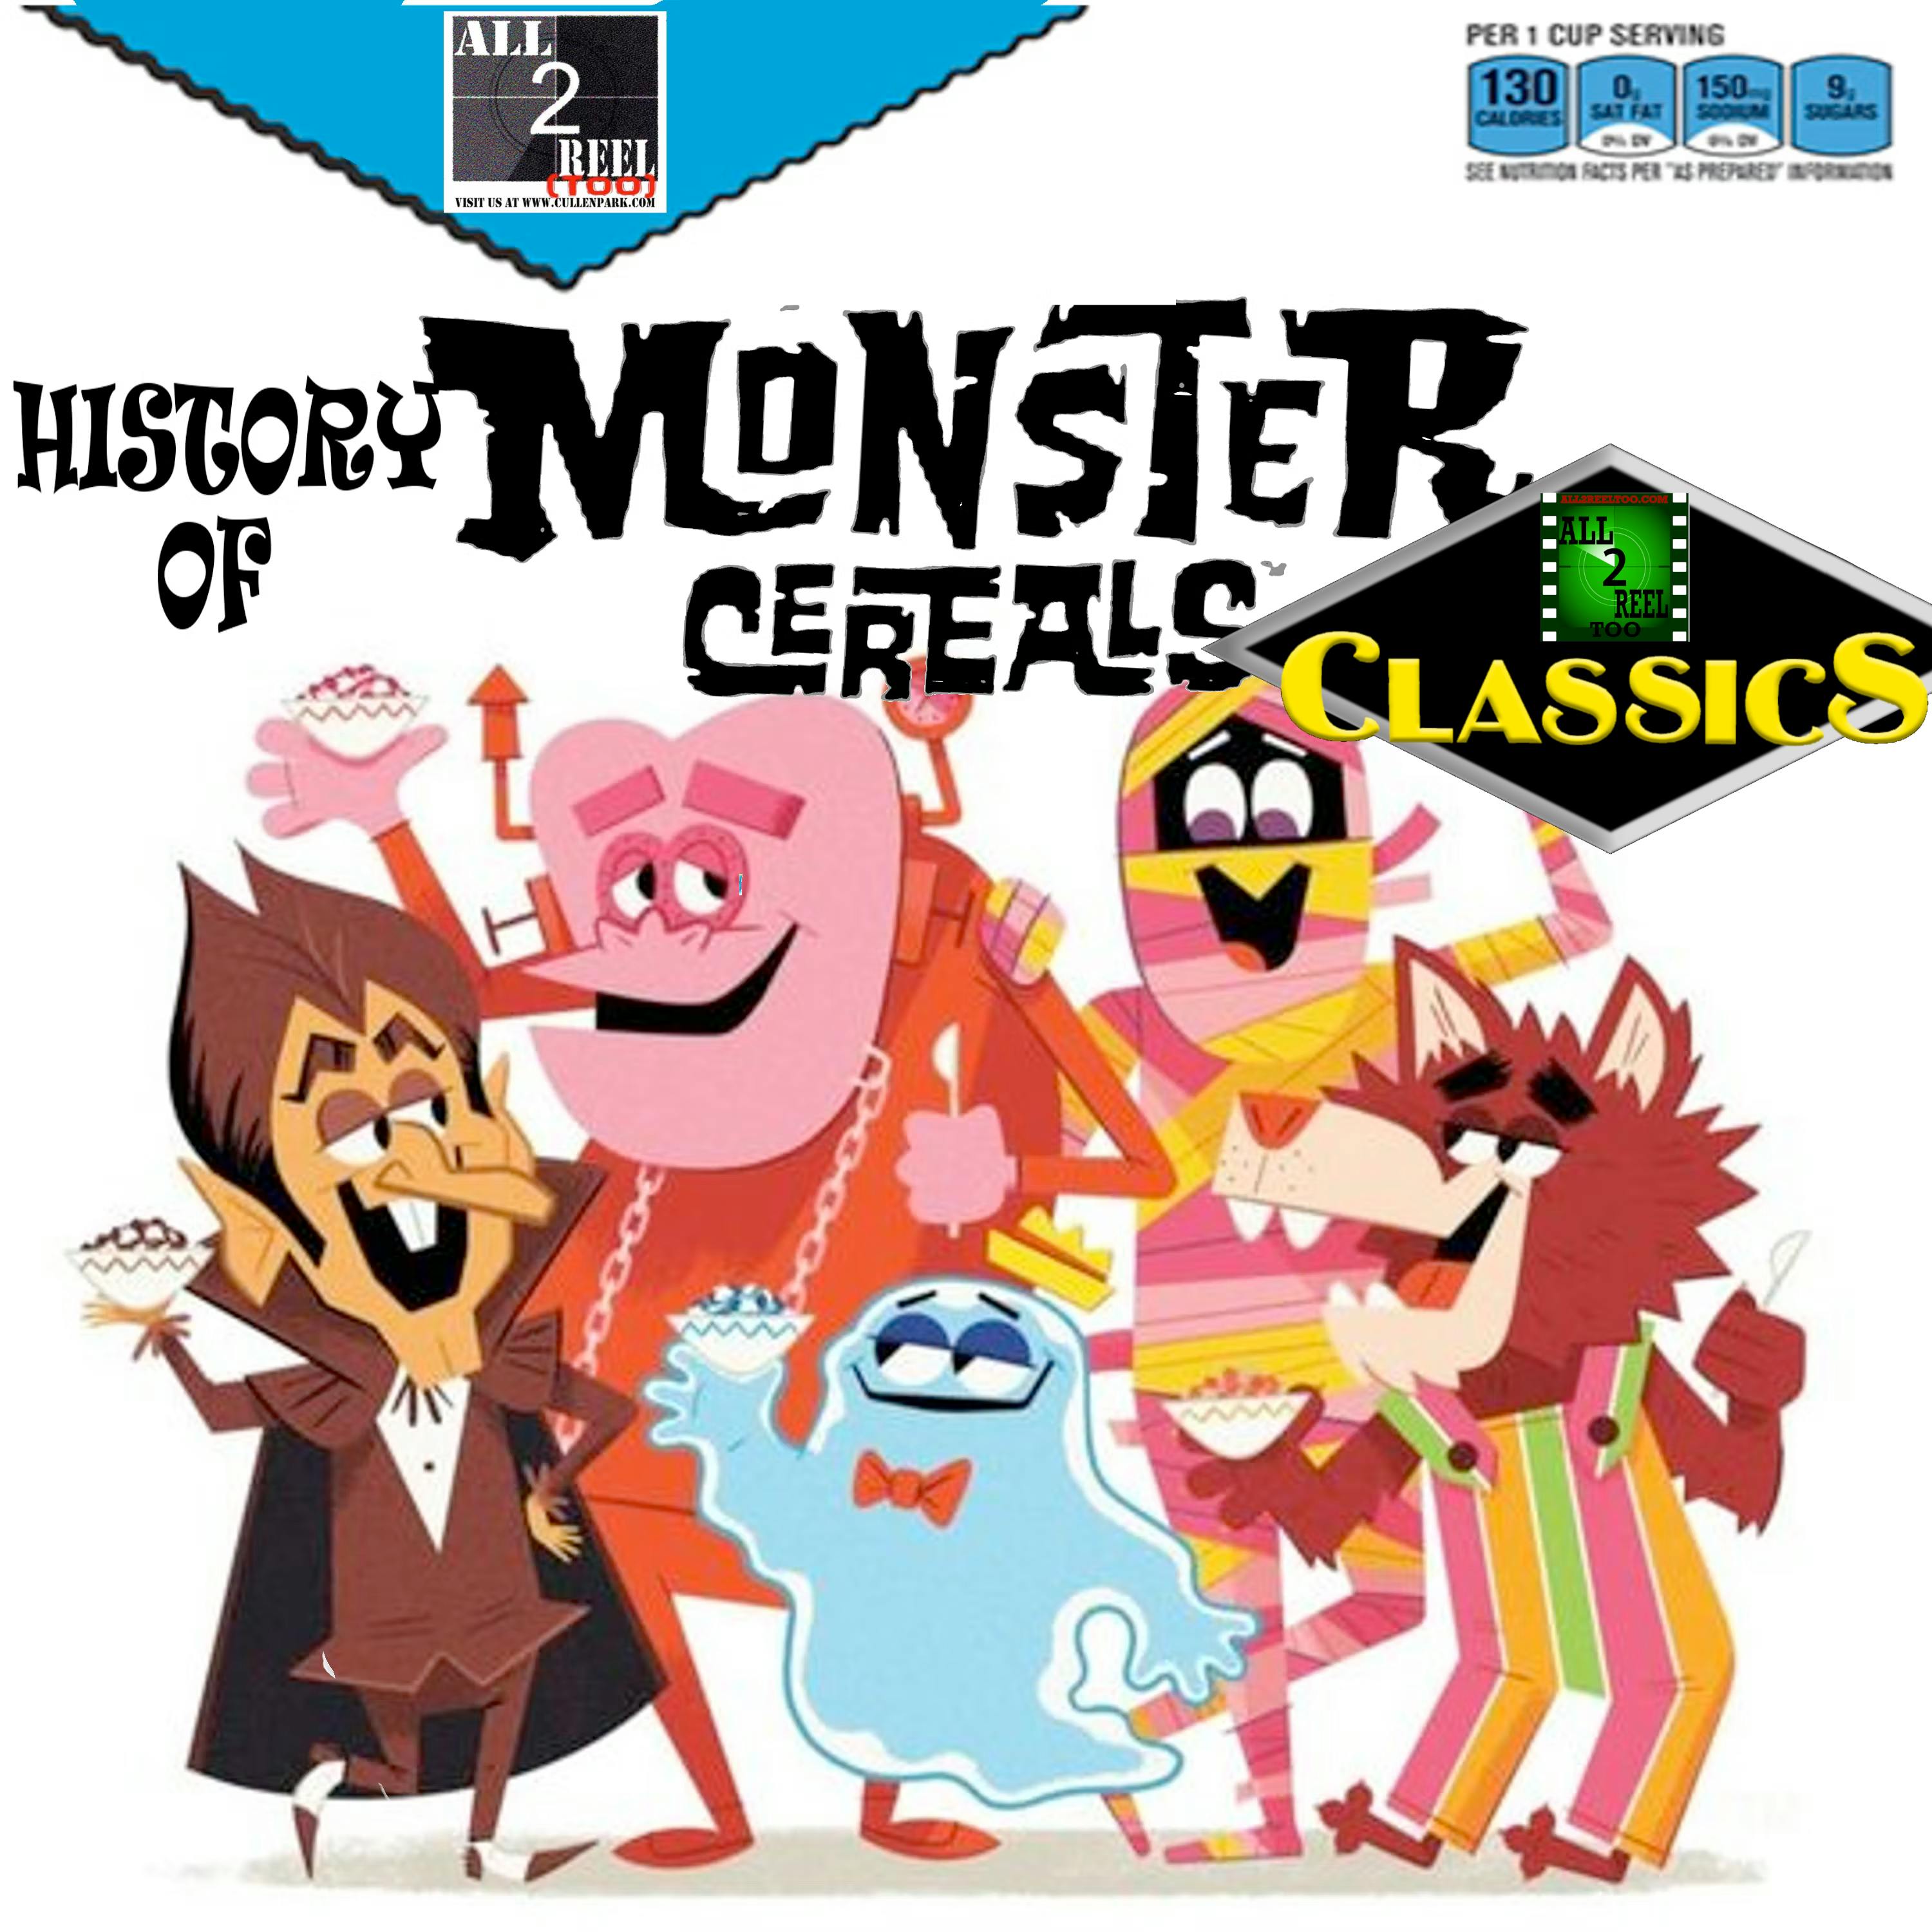 ALL2REELTOO CLASSICS -  HISTORY OF MONSTER CEREALS